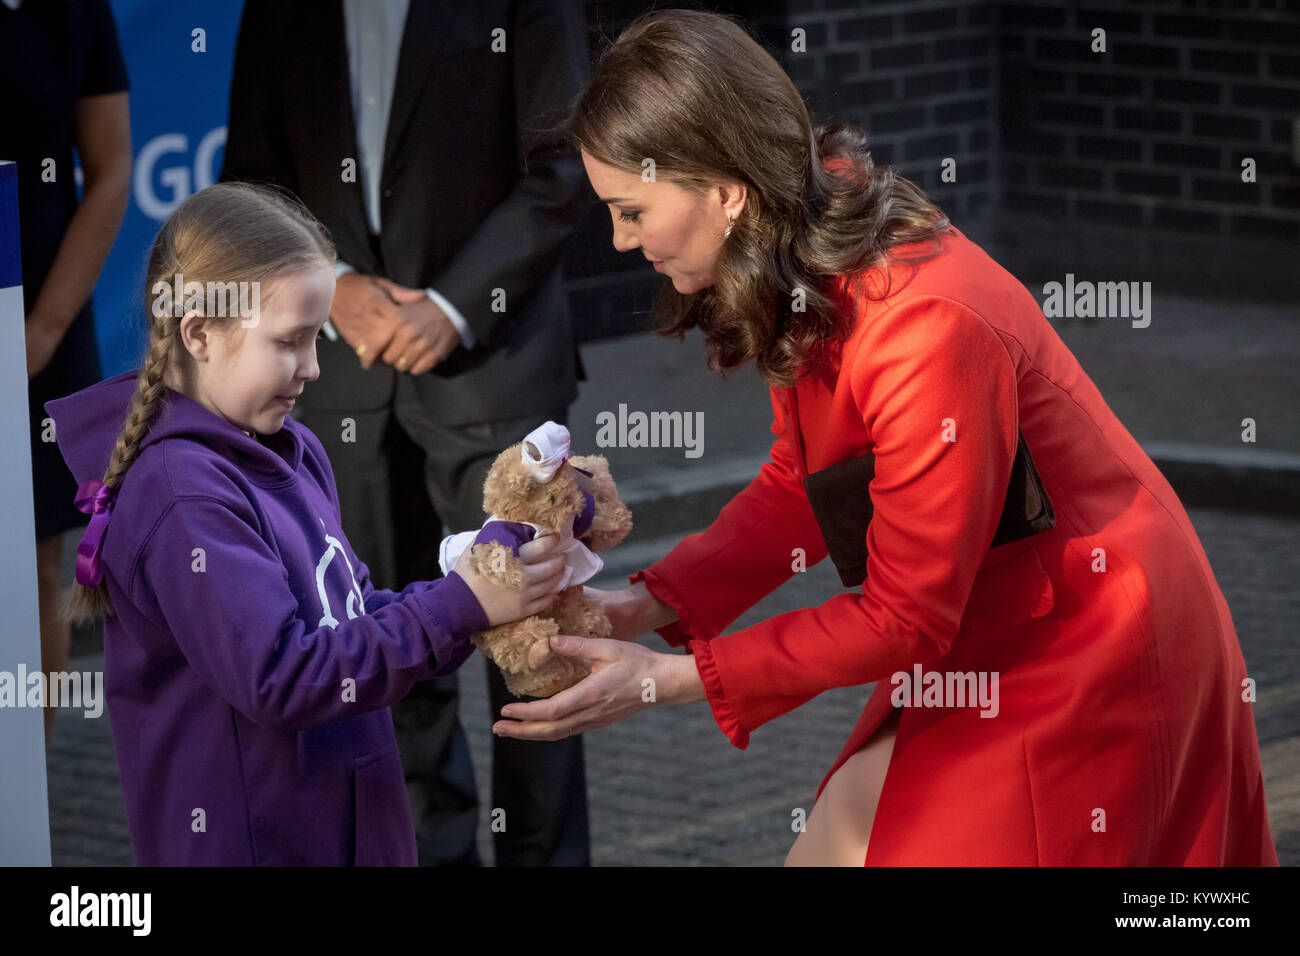 London, UK. 17th Jan, 2018. The Duchess of Cambridge is given teddy bear gifts by nine year old Ava Watt a patient at Great Ormond Street Hospital who has been treated for cystic fibrosis since birth. The Duchess's visit will officially open the Mittal Children's Medical Centre, home to the new Premier Inn Clinical Building. Credit: Guy Corbishley/Alamy Live News Stock Photo